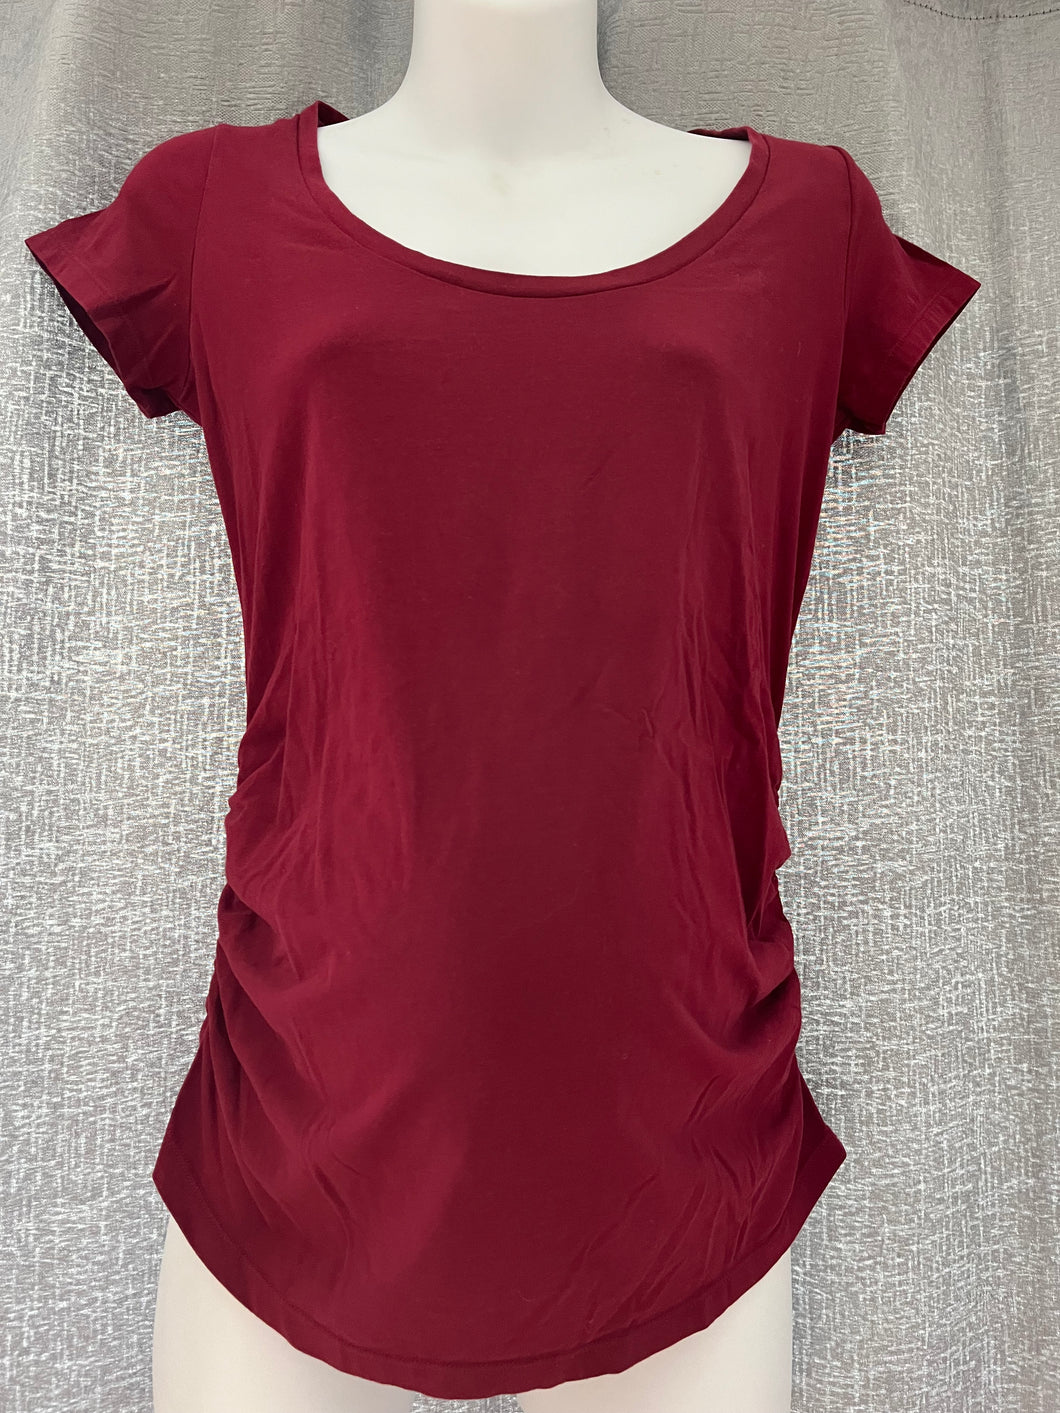 Old Navy Medium Fitted Maternity Tee